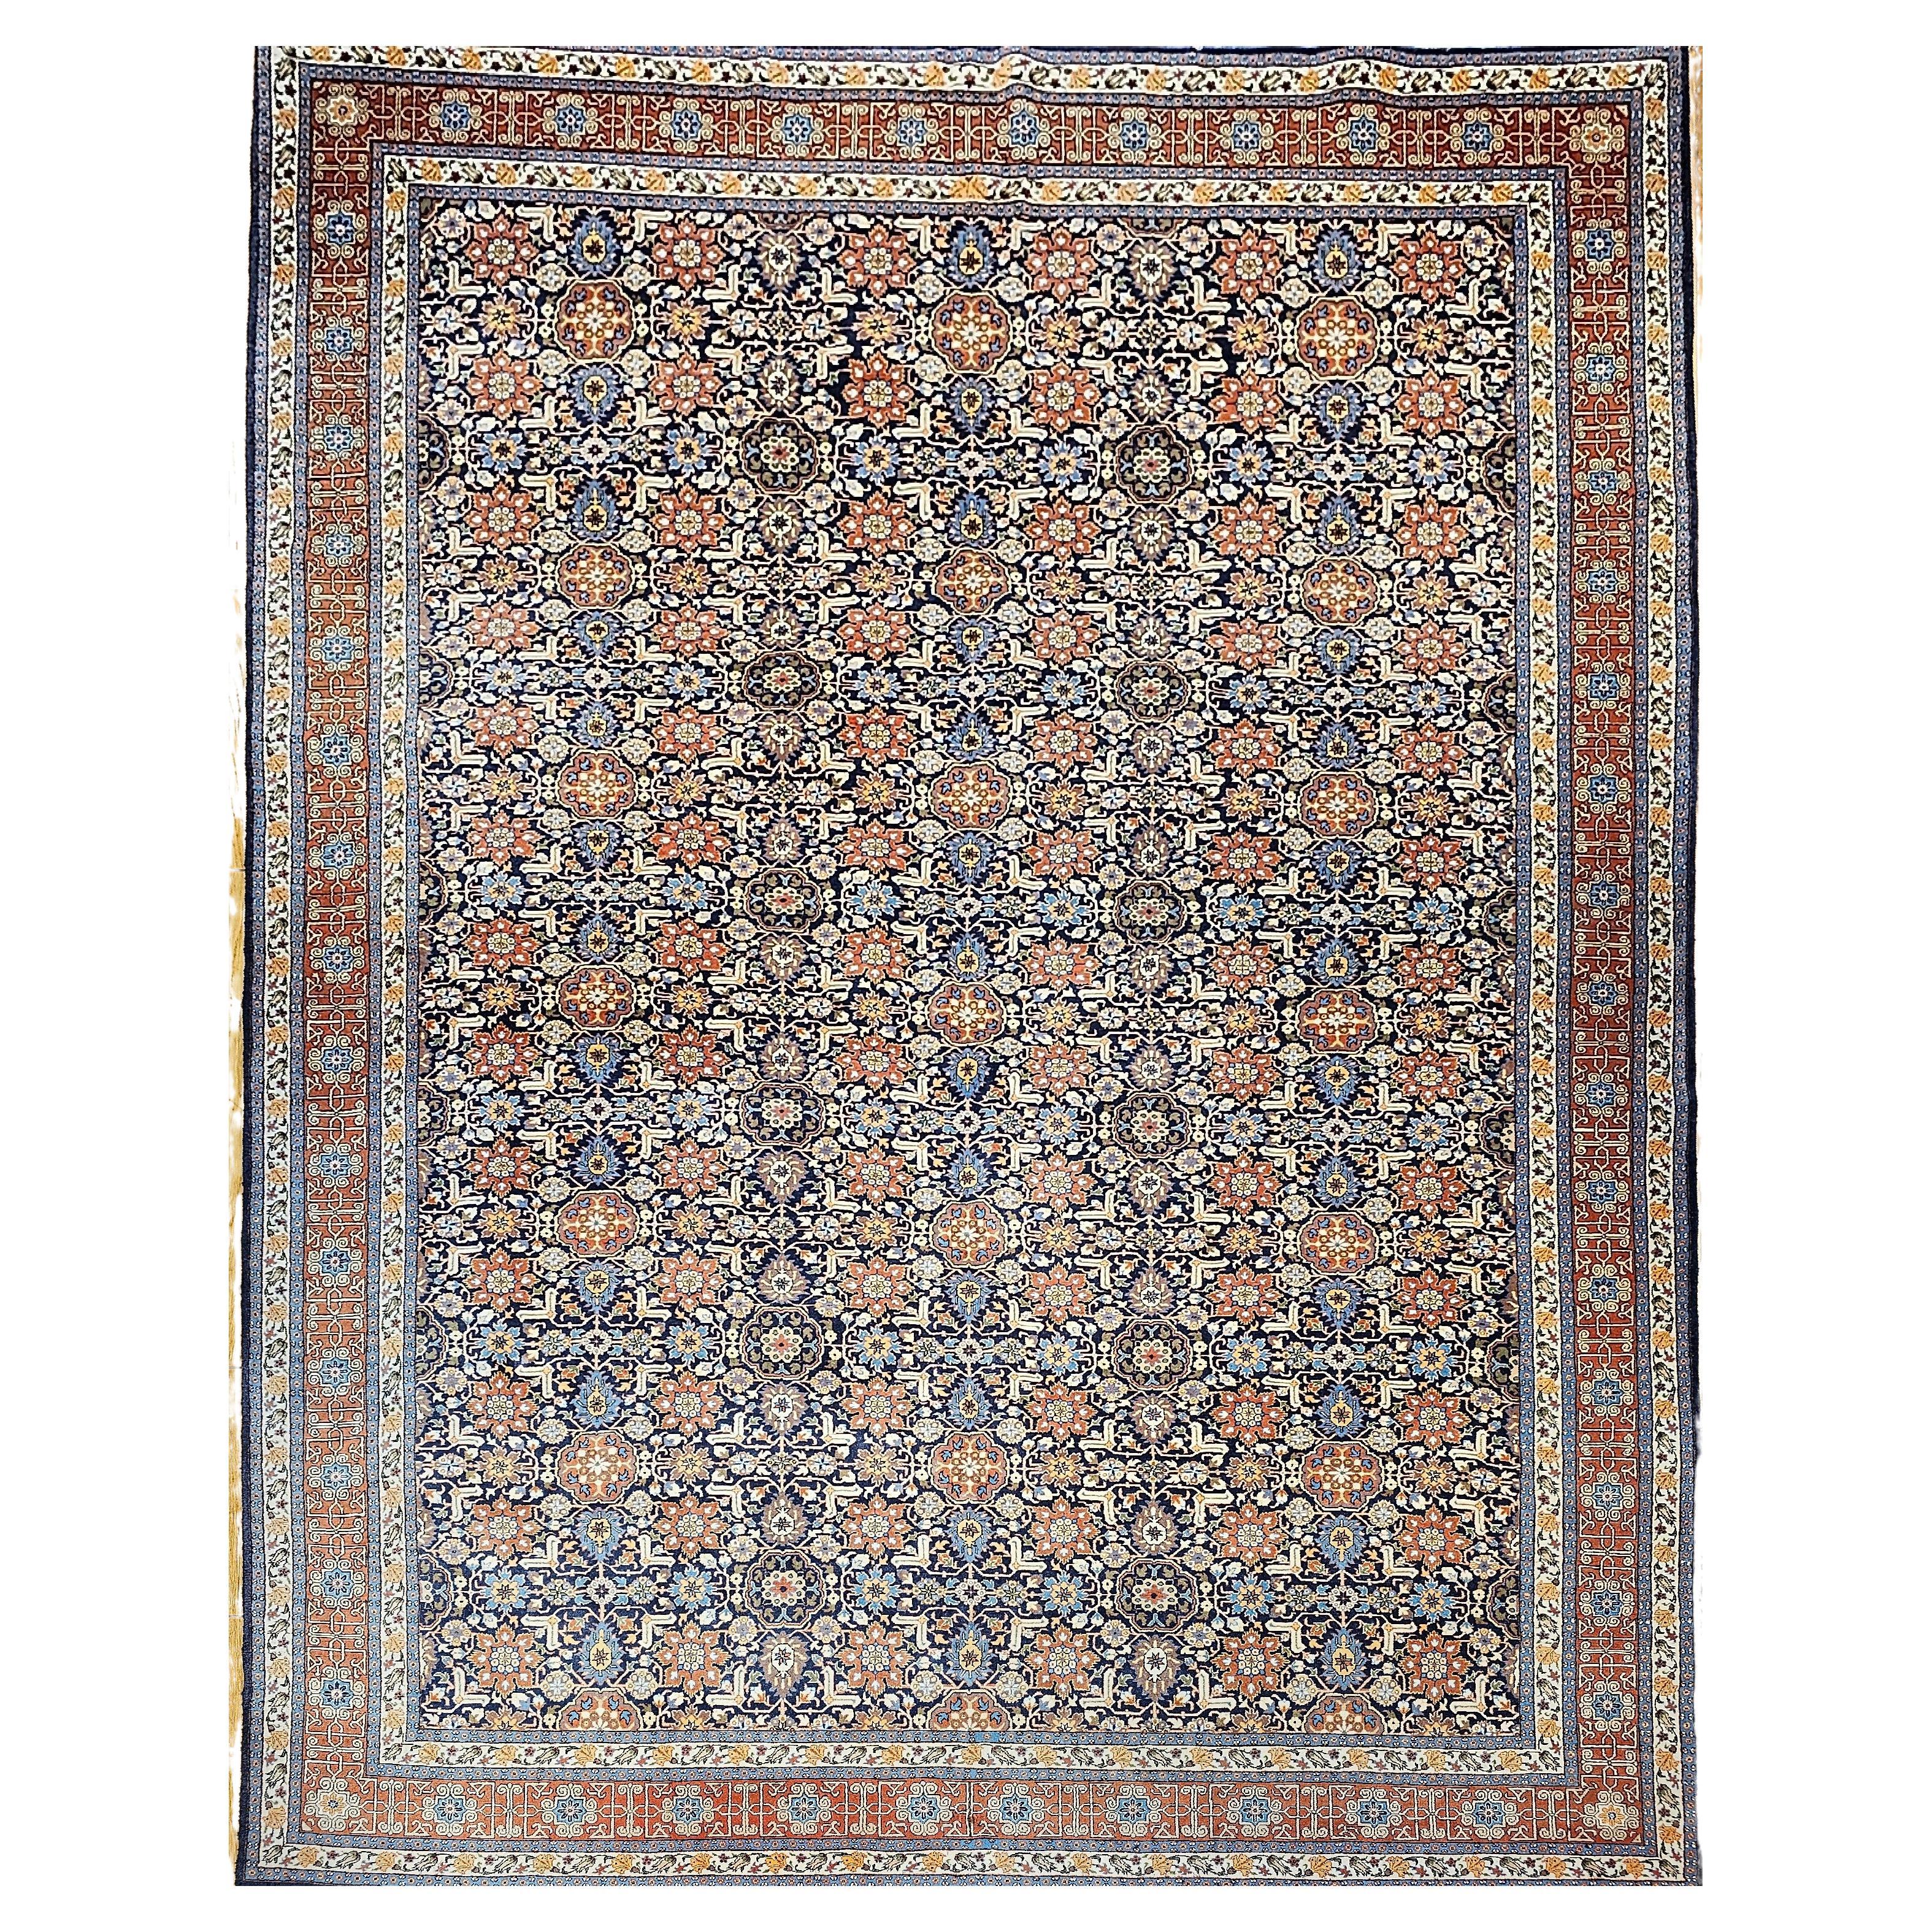 Vintage Persian Tabriz in Allover Afshan Geometric Pattern in Navy Blue, Red